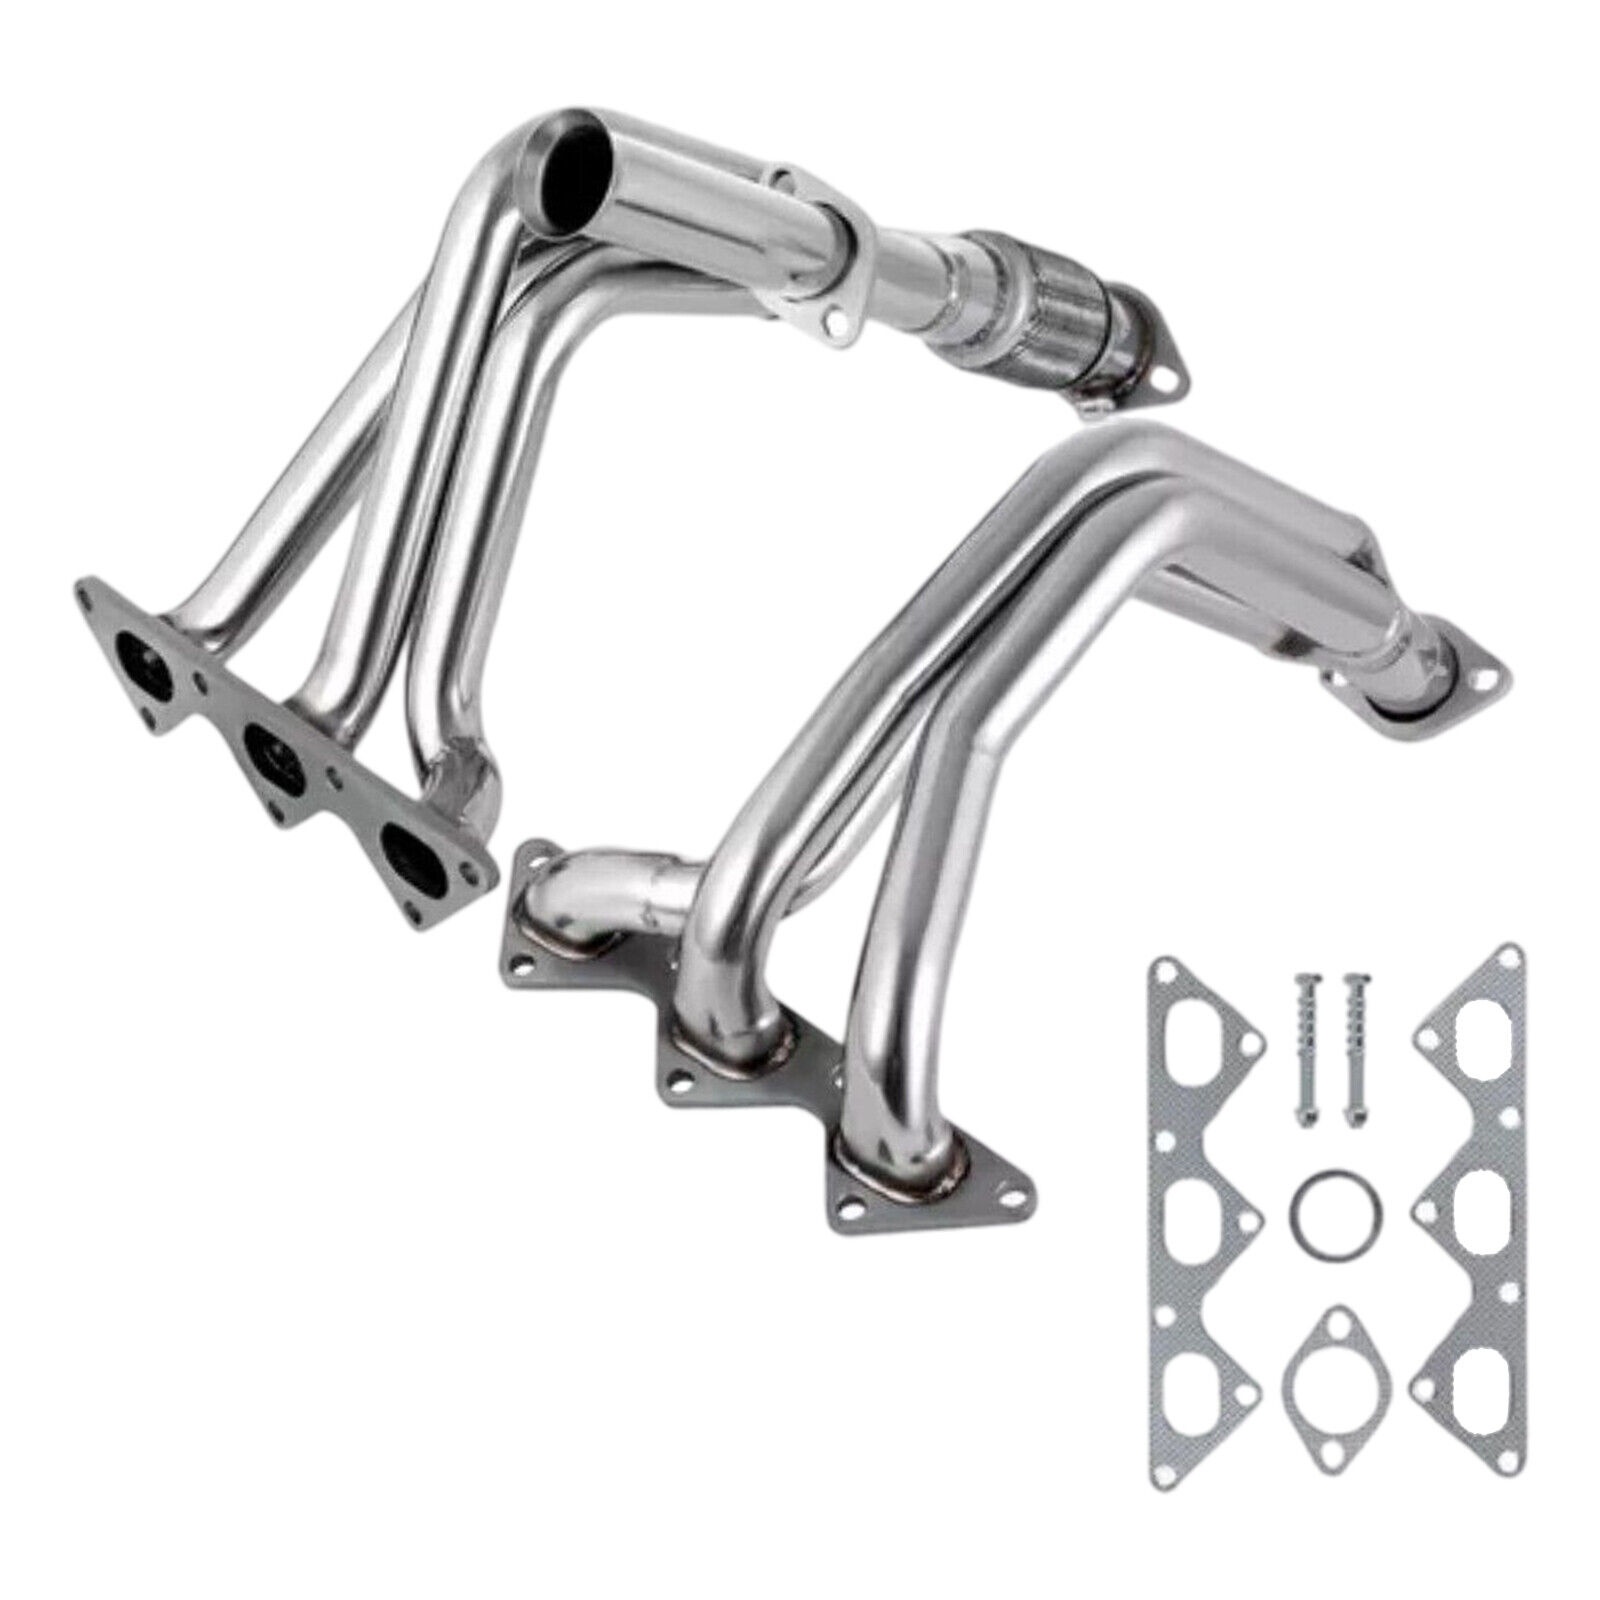 Stainless Exhaust Header For 1991-99 Mitsubishi 3000GT/91-96 Stealth 3.0 N/A VsH